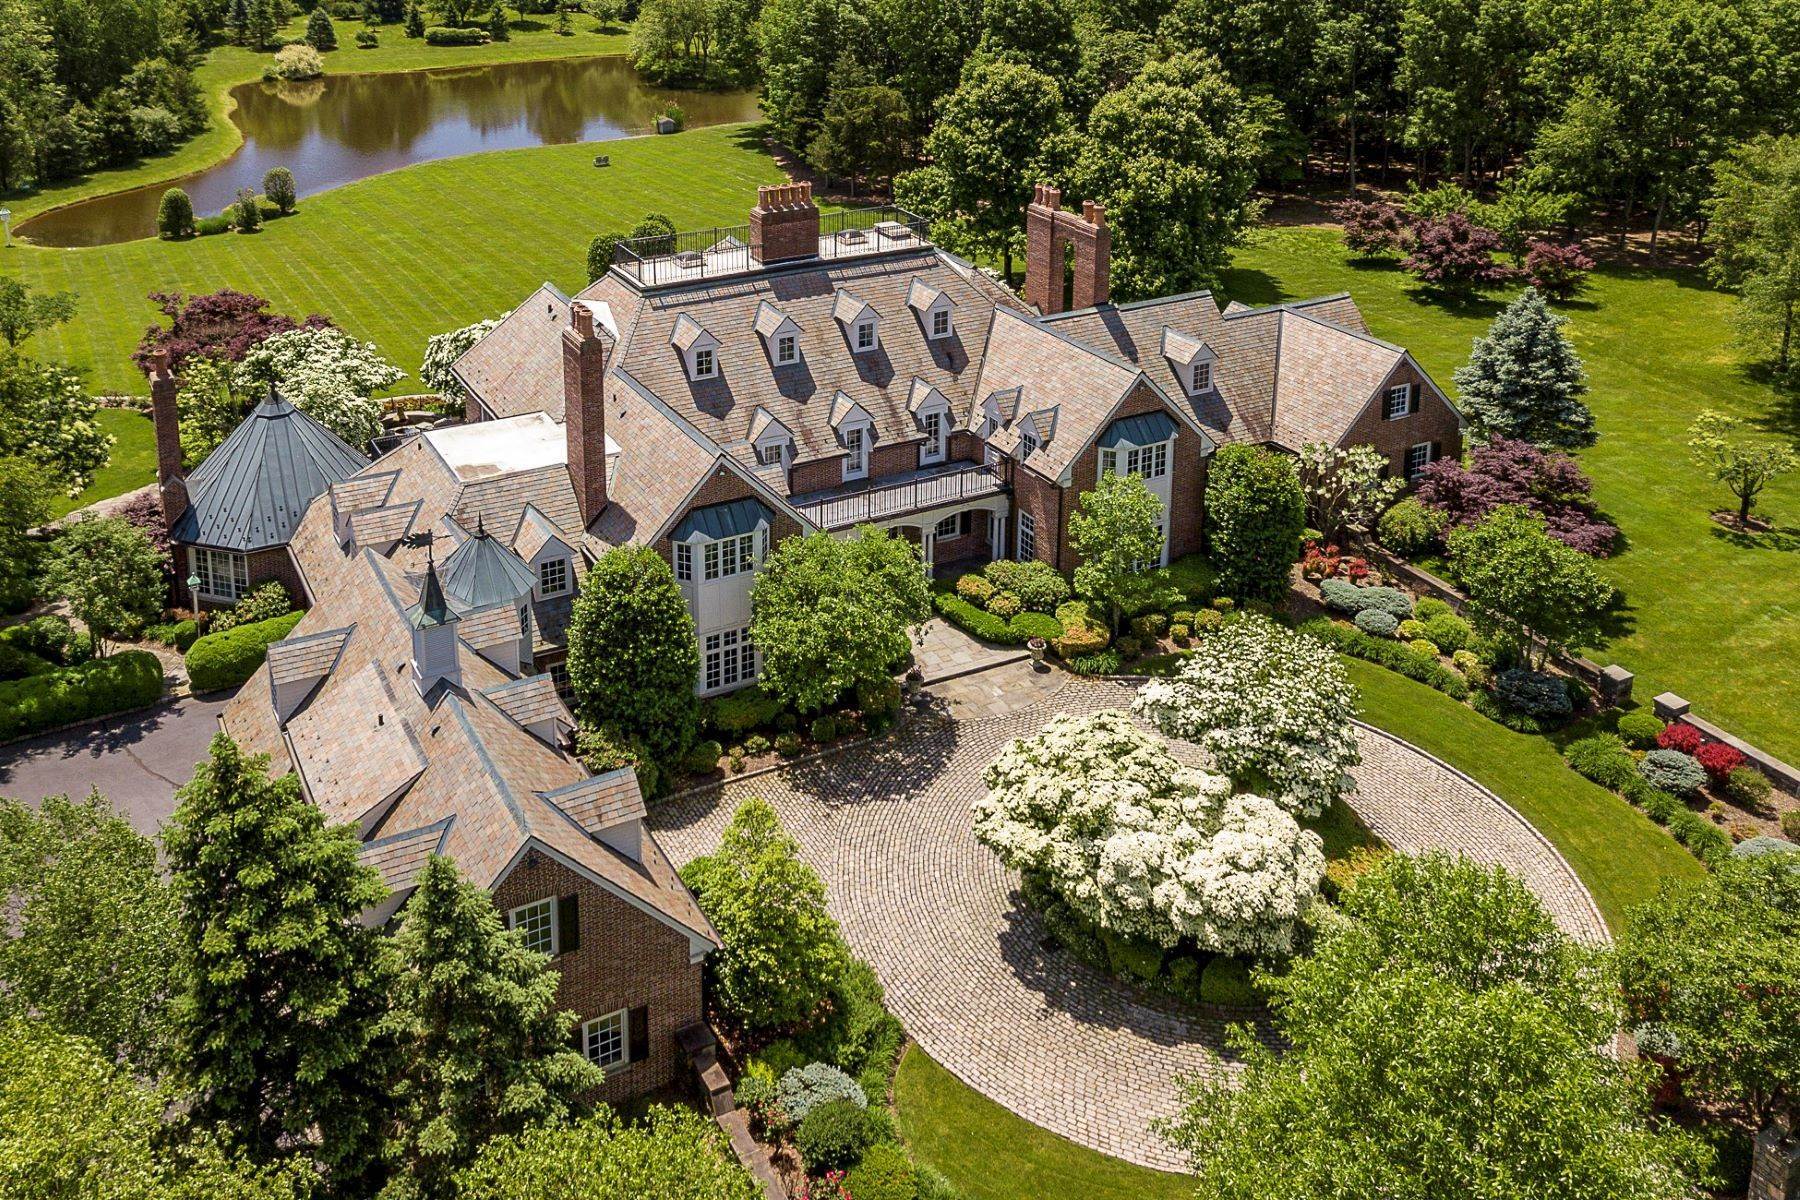 Single Family Homes für Verkauf beim Private Compound with Every Amenity Imaginable 82 Aunt Molly Road, Hopewell, New Jersey 08525 Vereinigte Staaten